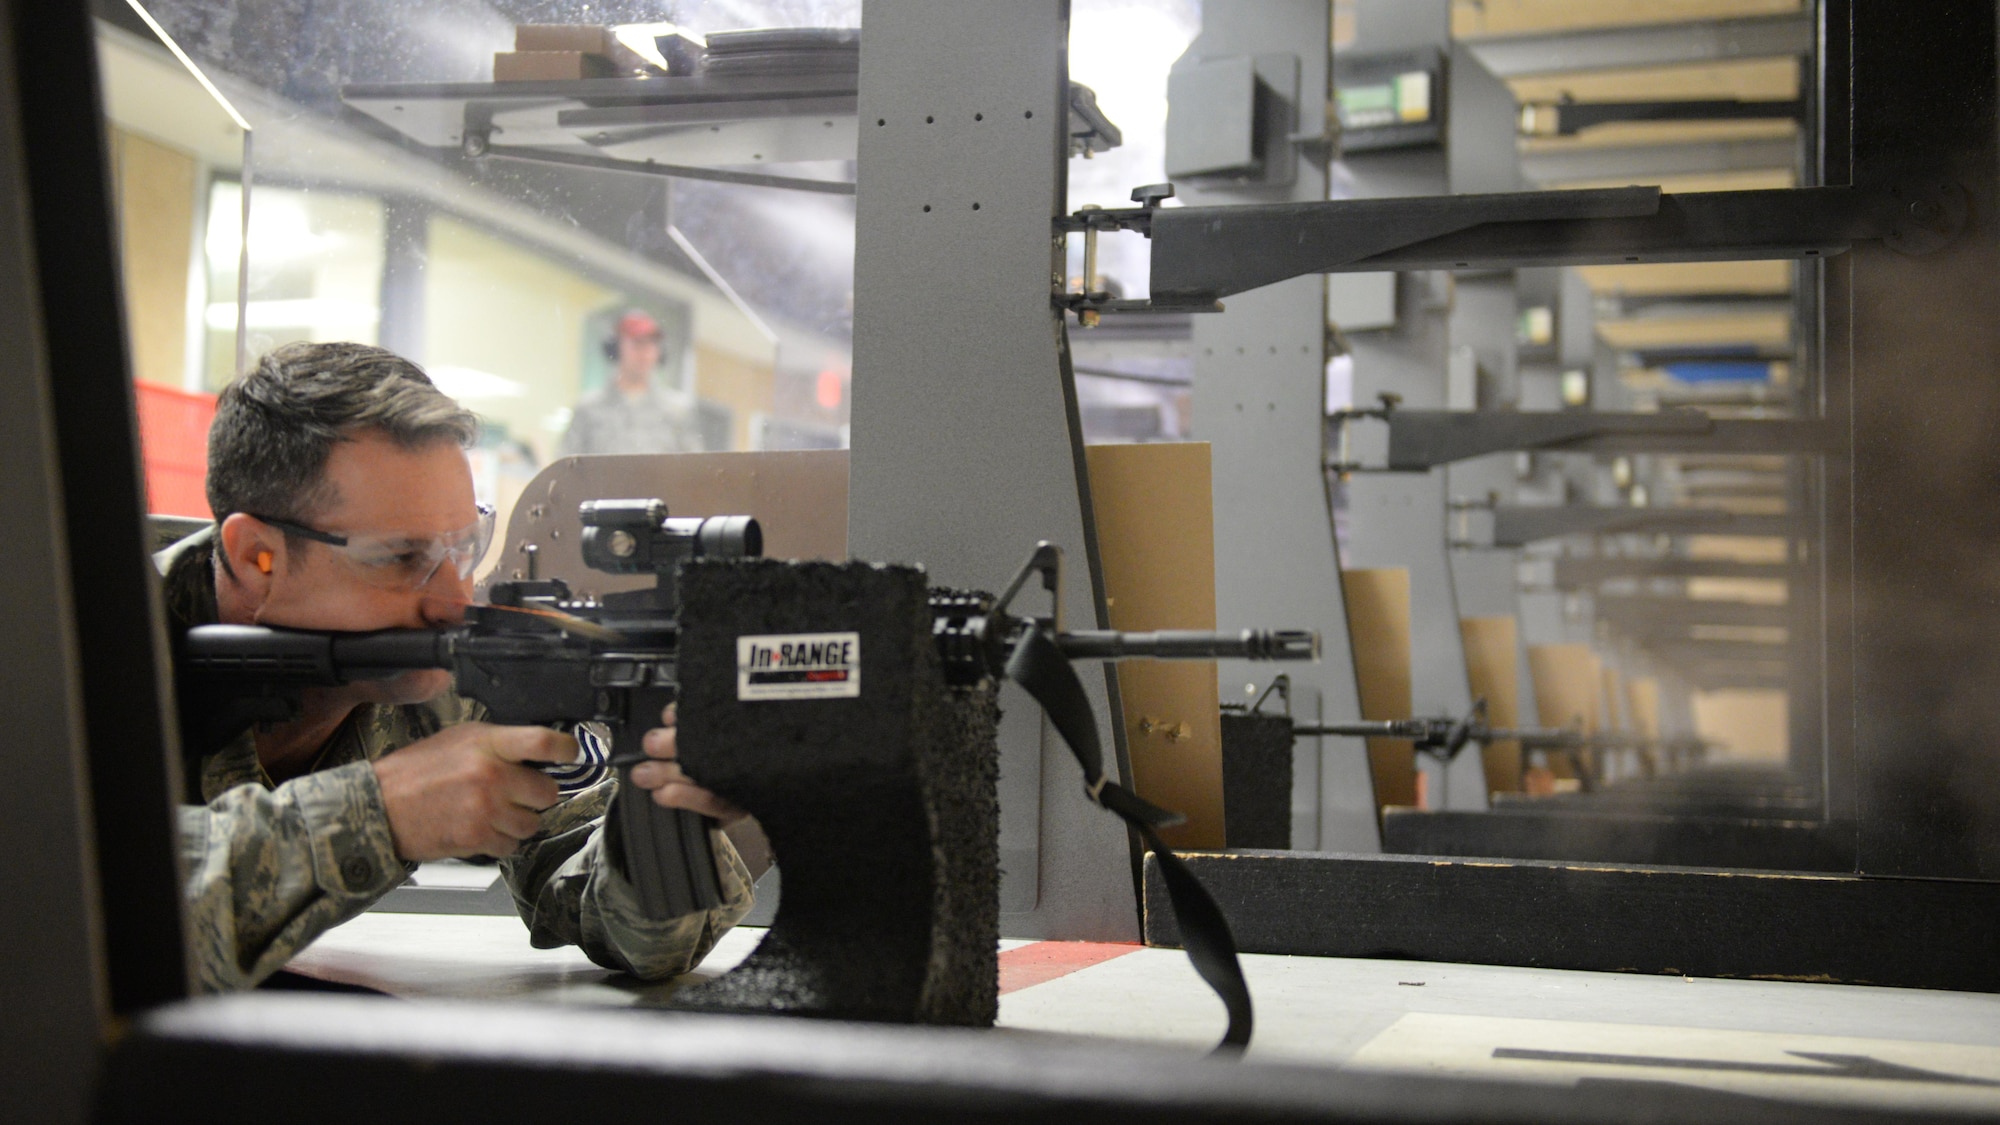 Tech. Sgt. Russell Smith, 366th Training Squadron, Detachment 6 structures instructor, Naval Construction Battalion Center, Gulfport, Miss., shoots a target with an M4 Carbine at the Combat Arms Training and Maintenance building March 9, 2016, Keesler Air Force Base, Miss. Before being deployed, Airmen must pass weapons qualifications with the M4 Carbine and be able to shoot from four positions – prone supported, prone unsupported, kneeling supported and over barricade supported – and hit their target from as far as 300 meters away. (U.S. Air Force photo by Airman 1st Class Travis Beihl)